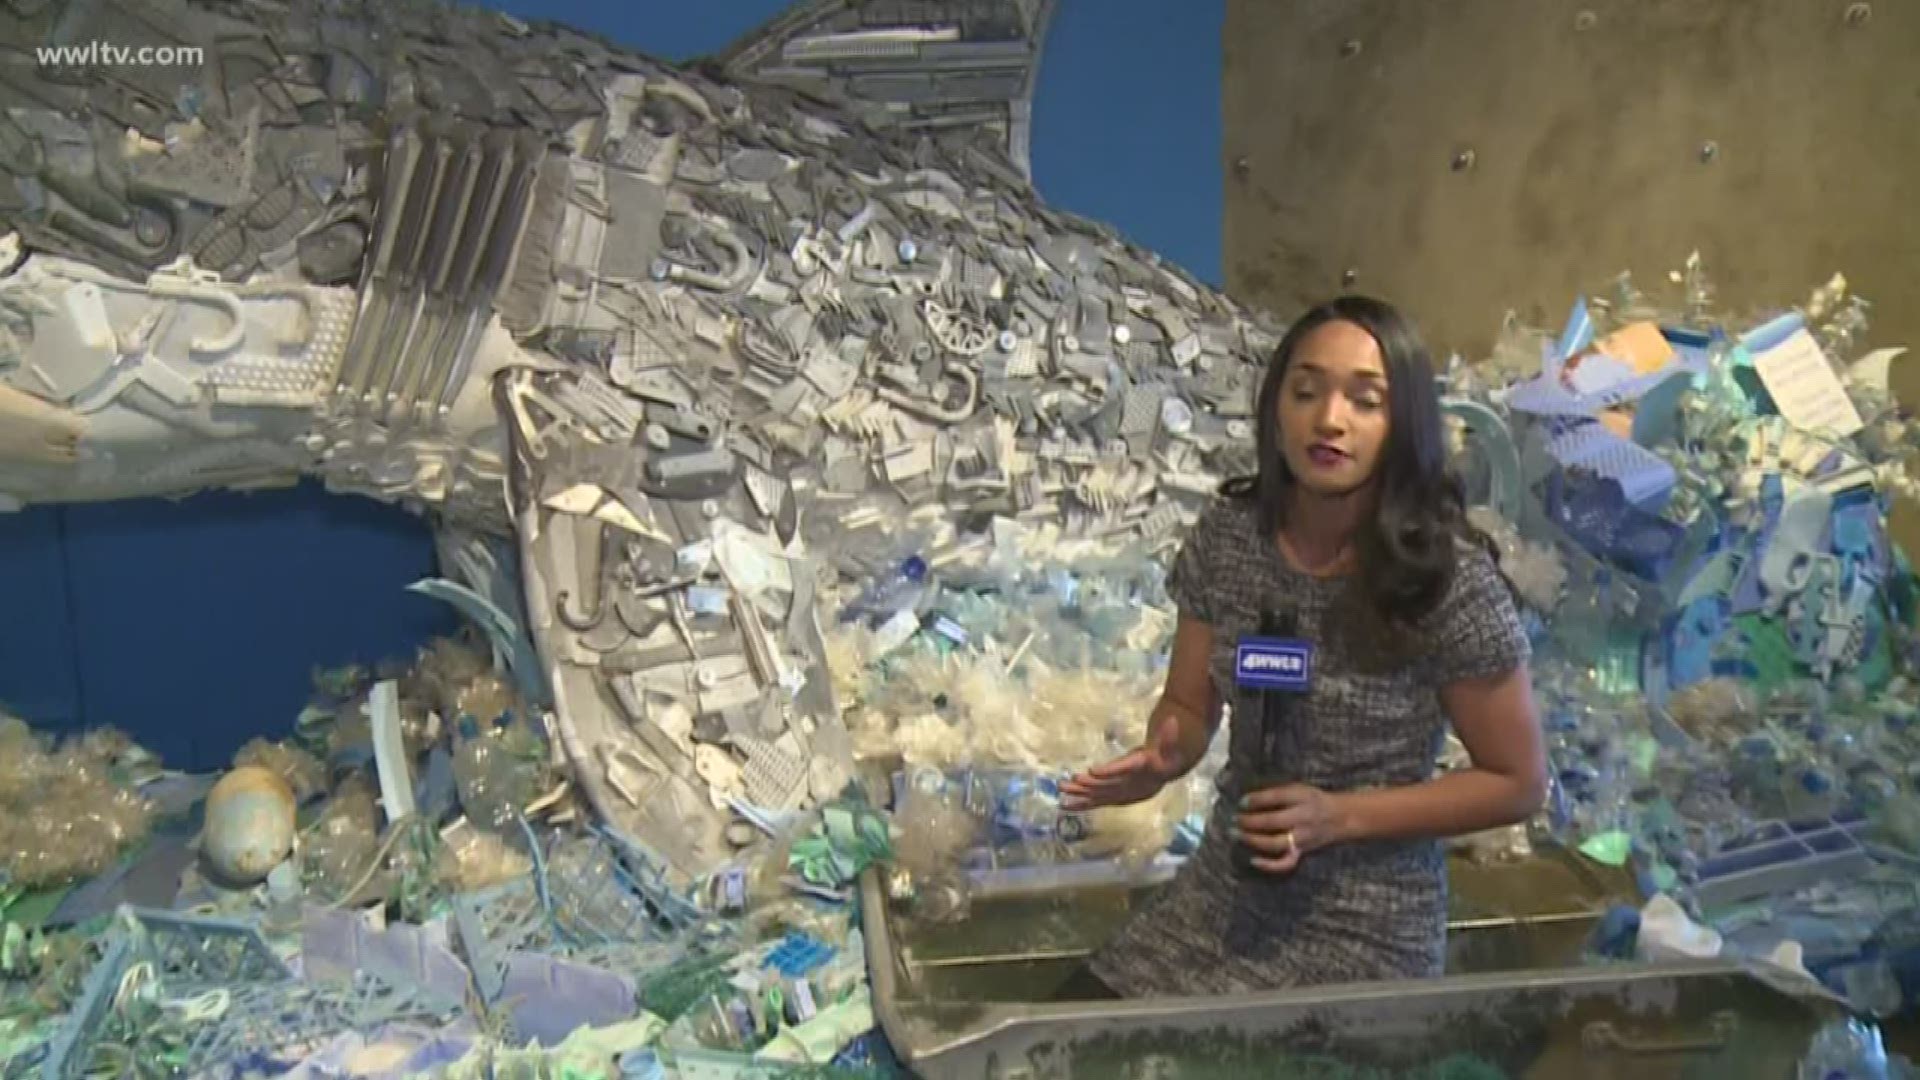 In honor of Earth Day, Meghan Kee brings us to the Audubon Aquarium to see the Washed Ashore Exhibit.